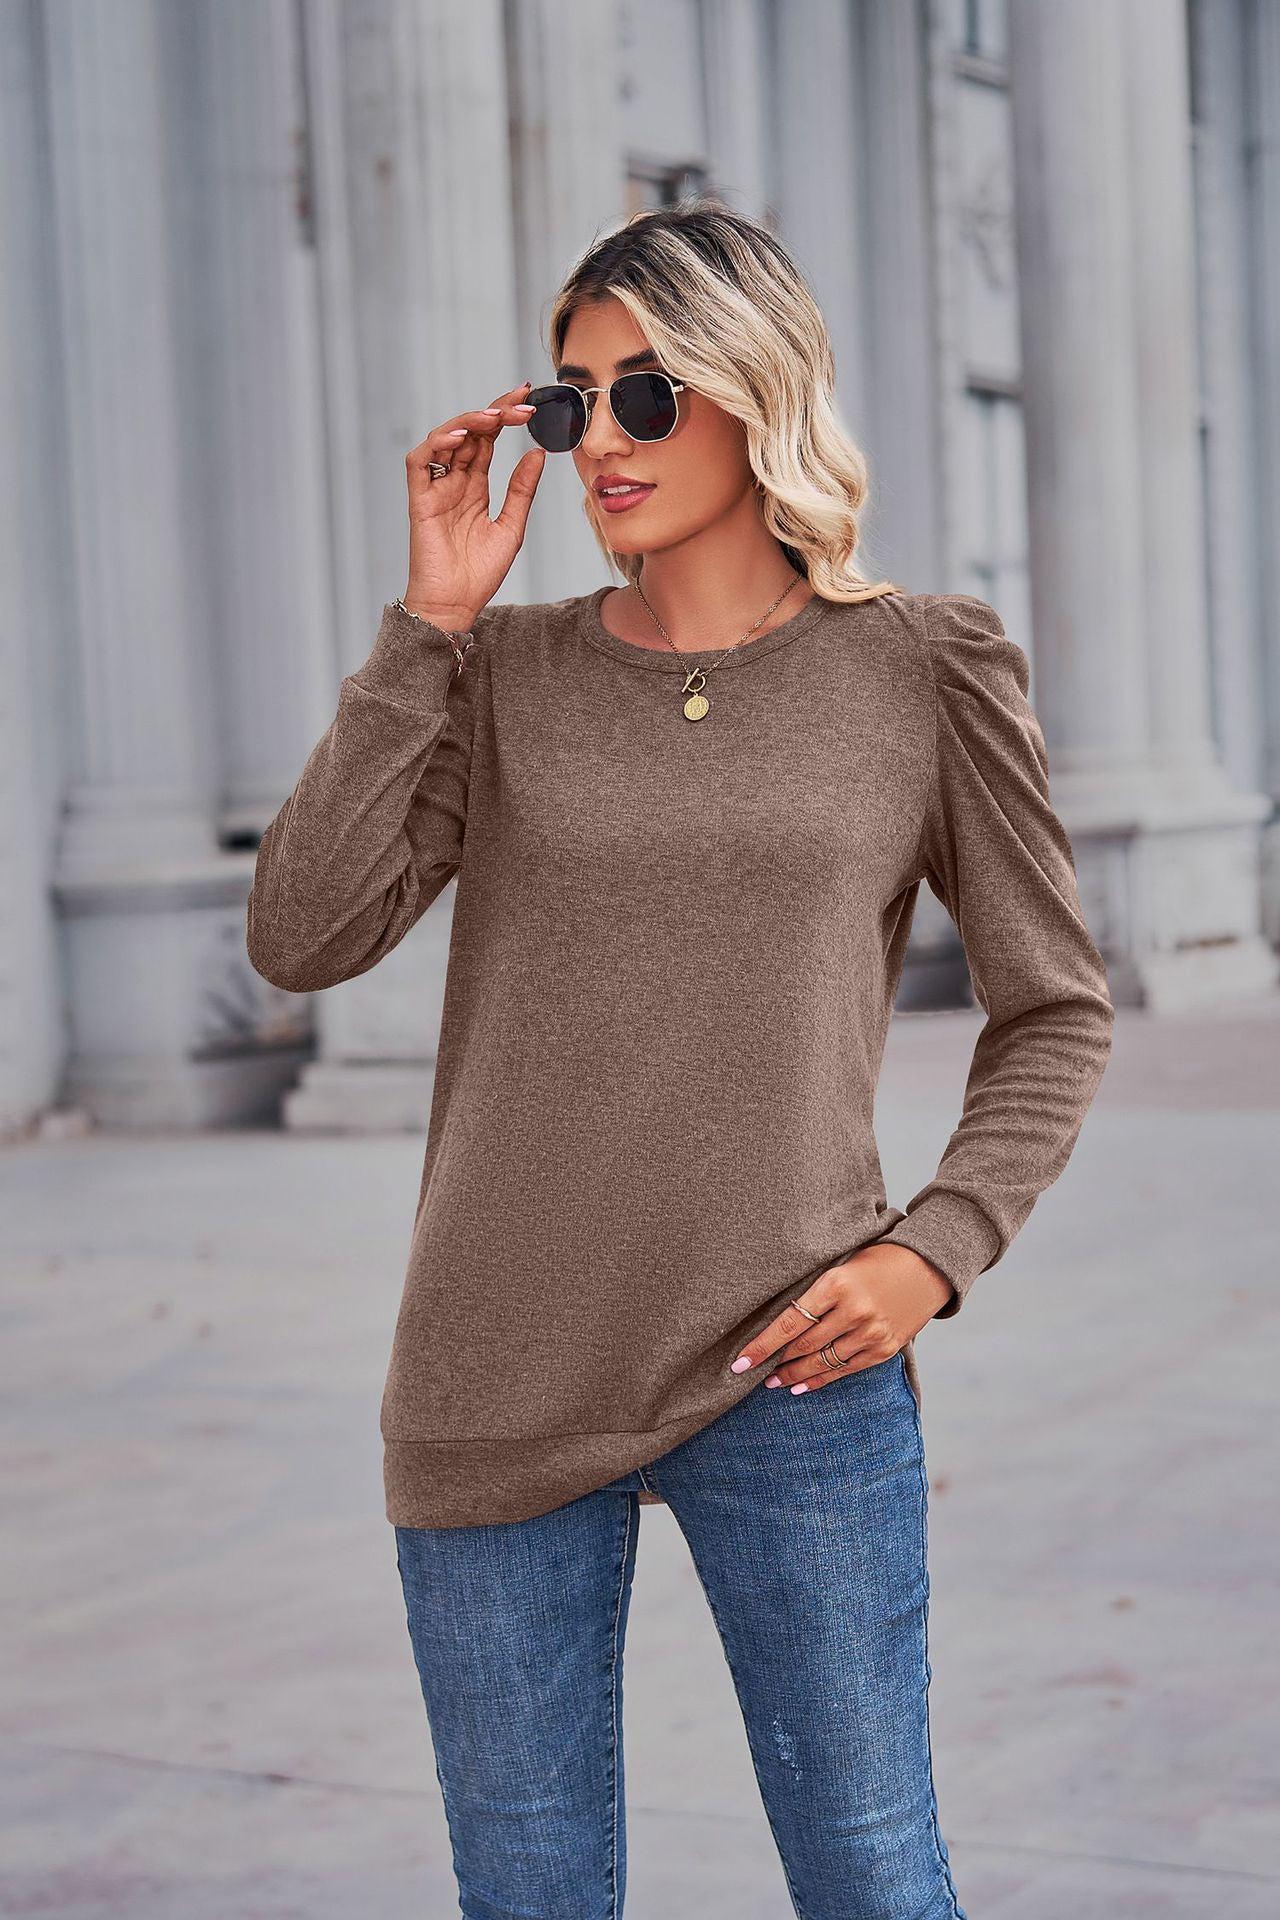 Heathered Puff Sleeve Round Neck Tunic Top BLUE ZONE PLANET